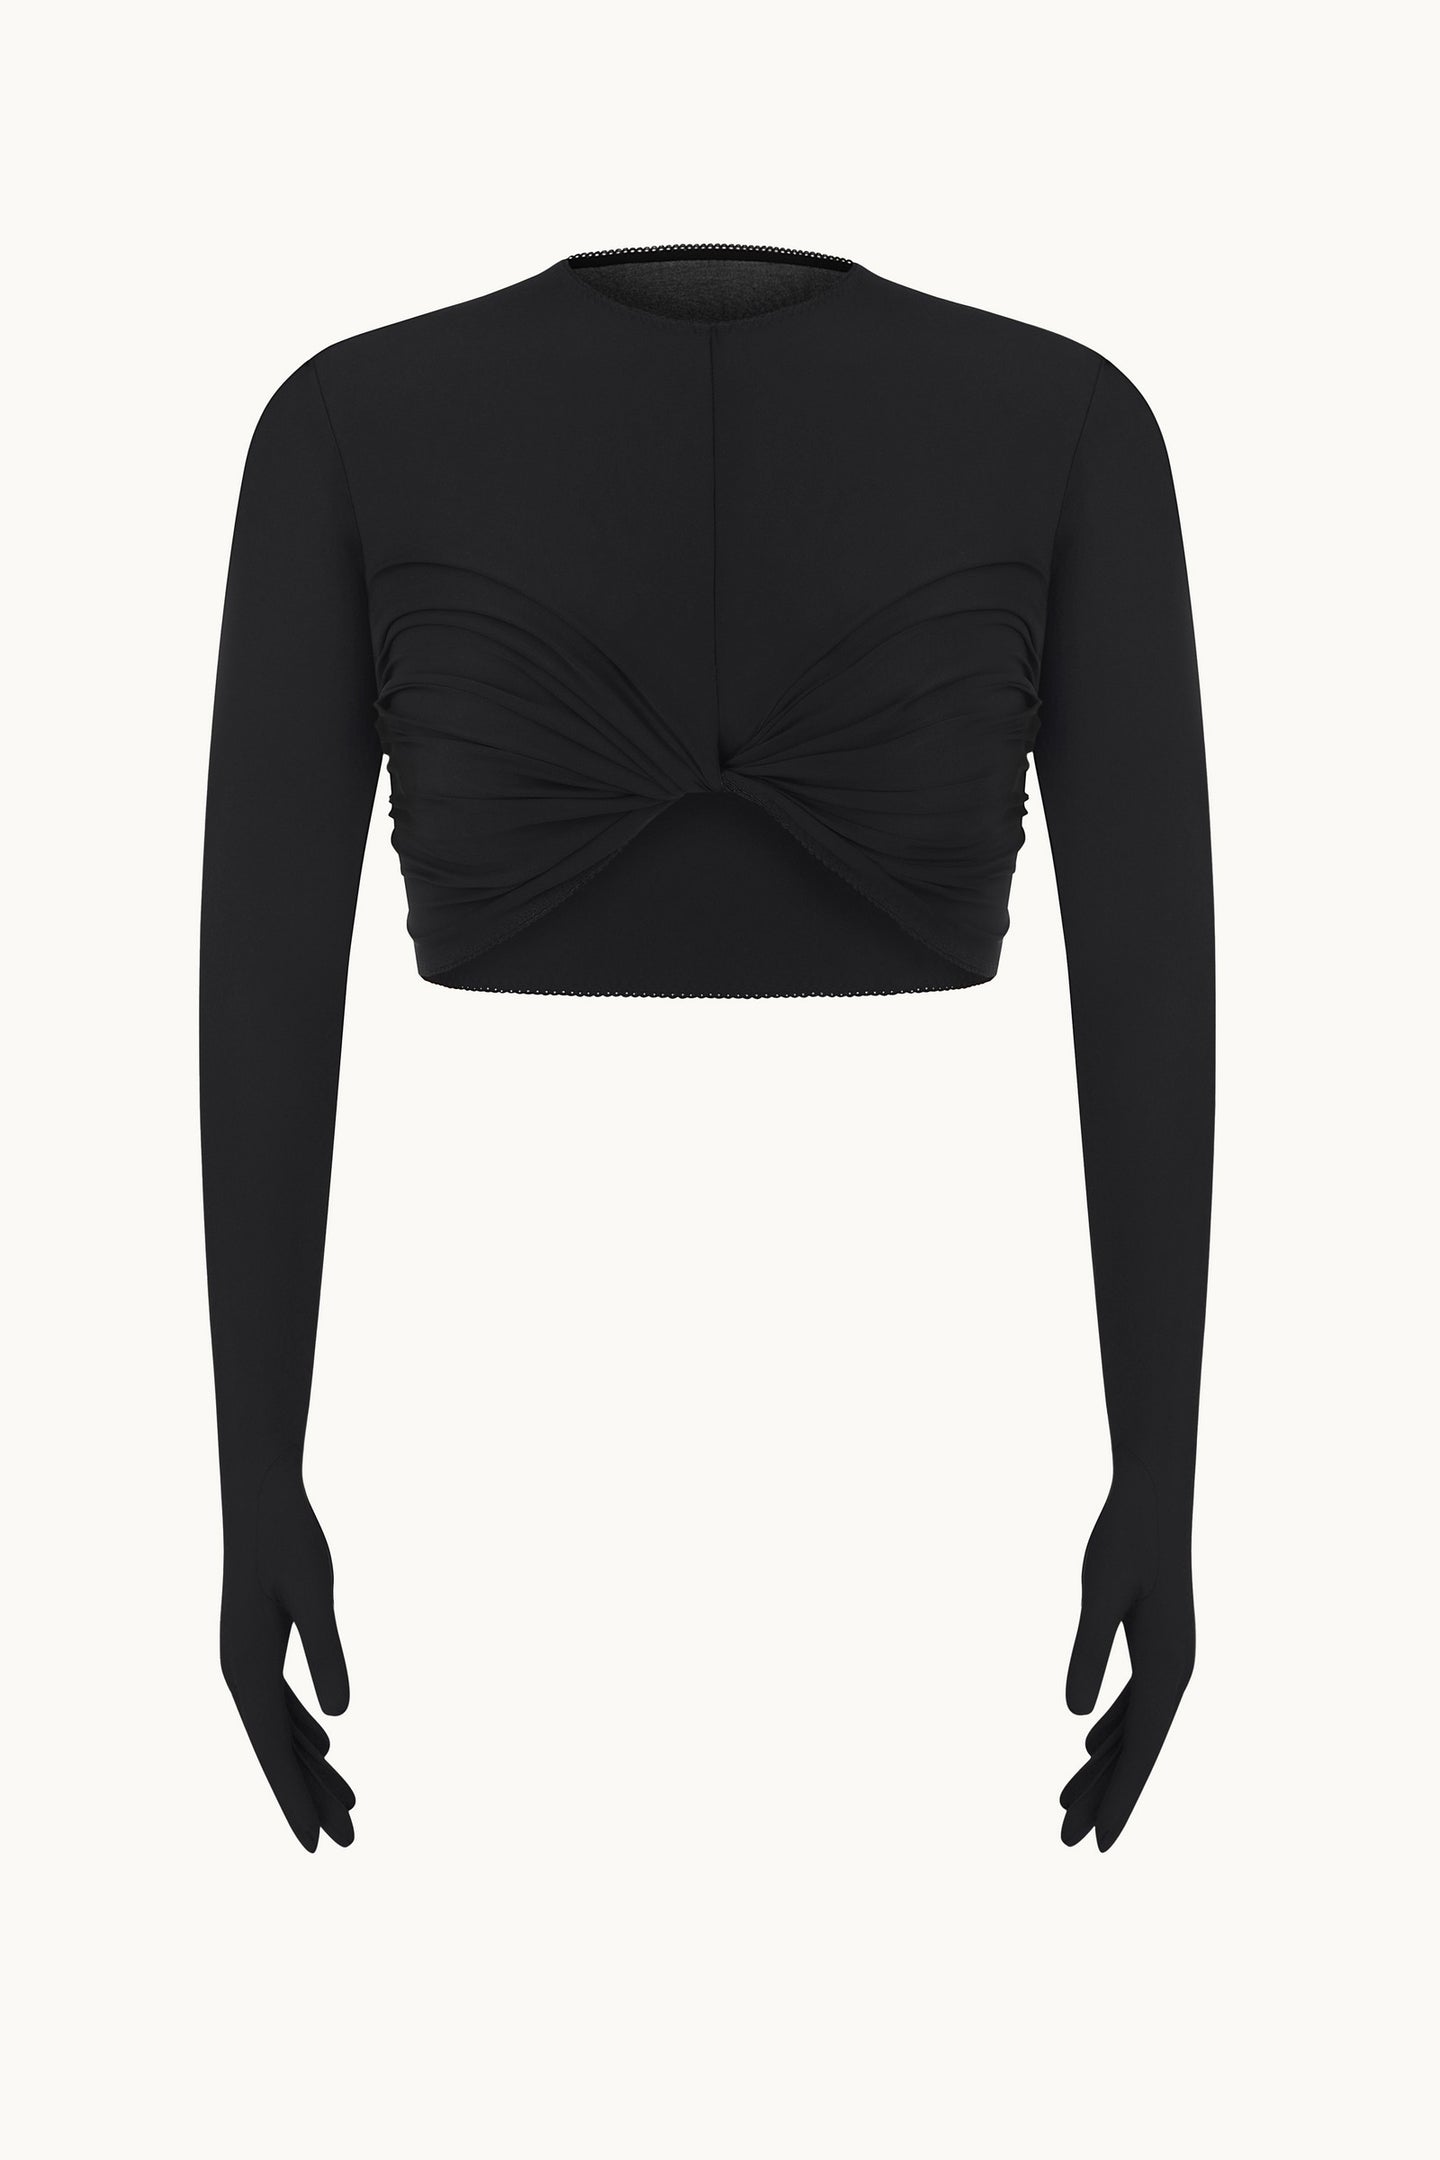 Maia black top front view